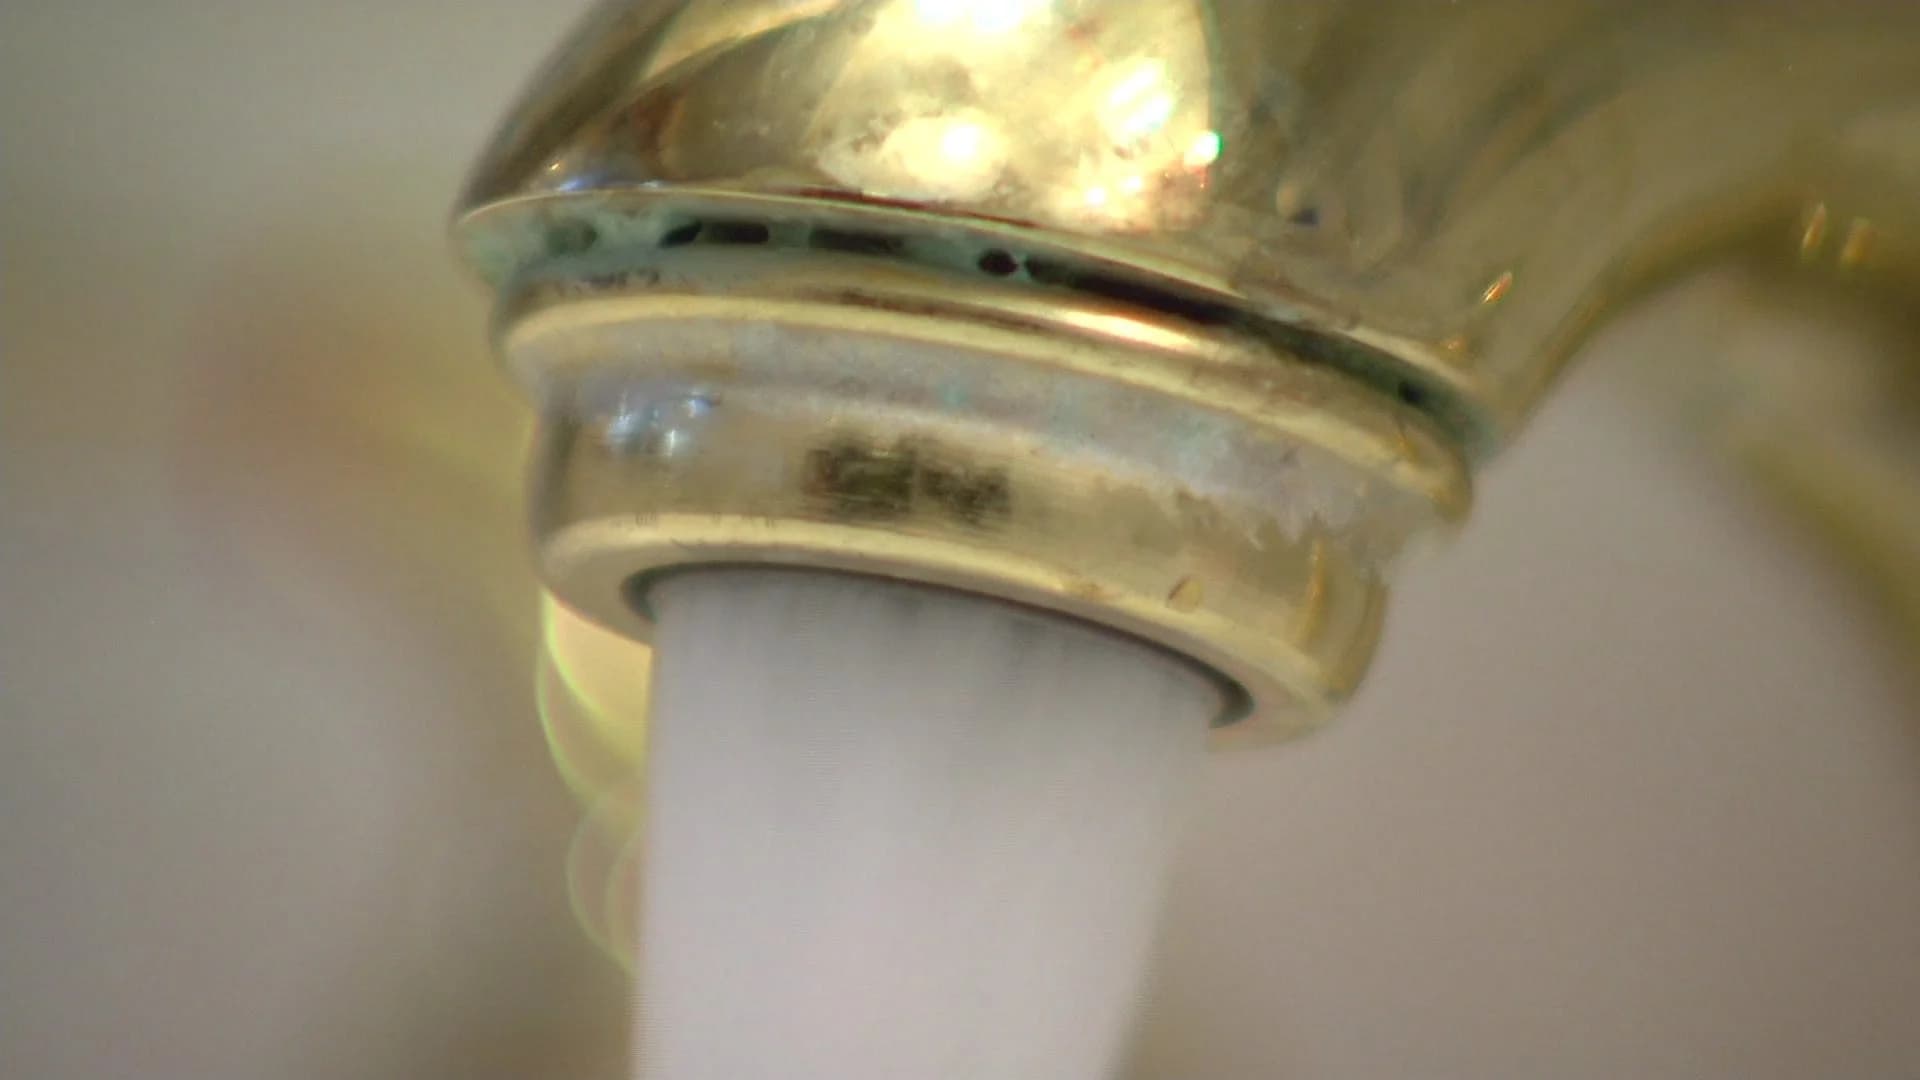 Report finds high levels of chromium-6 in US drinking water